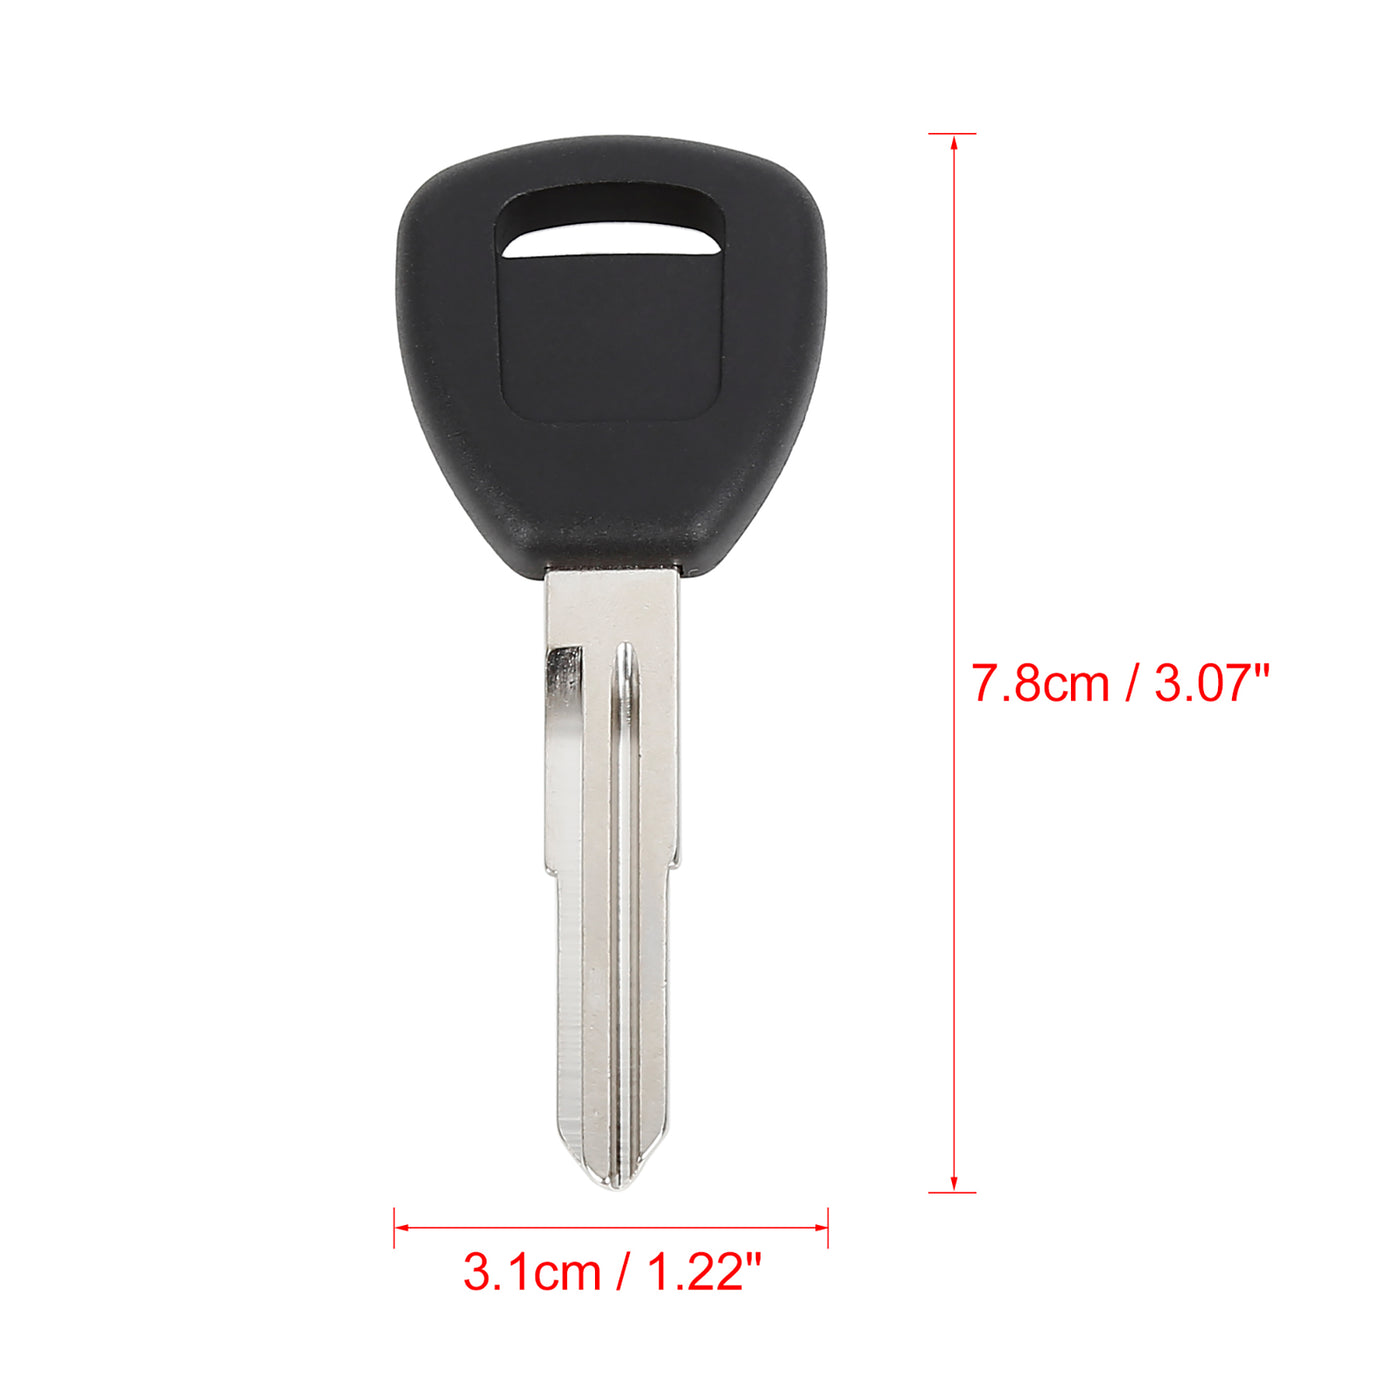 X AUTOHAUX T5 Chipped Uncut Ignition Key Entry Remote Fob Control HD106-PT5 for Honda Accord 1998-2002